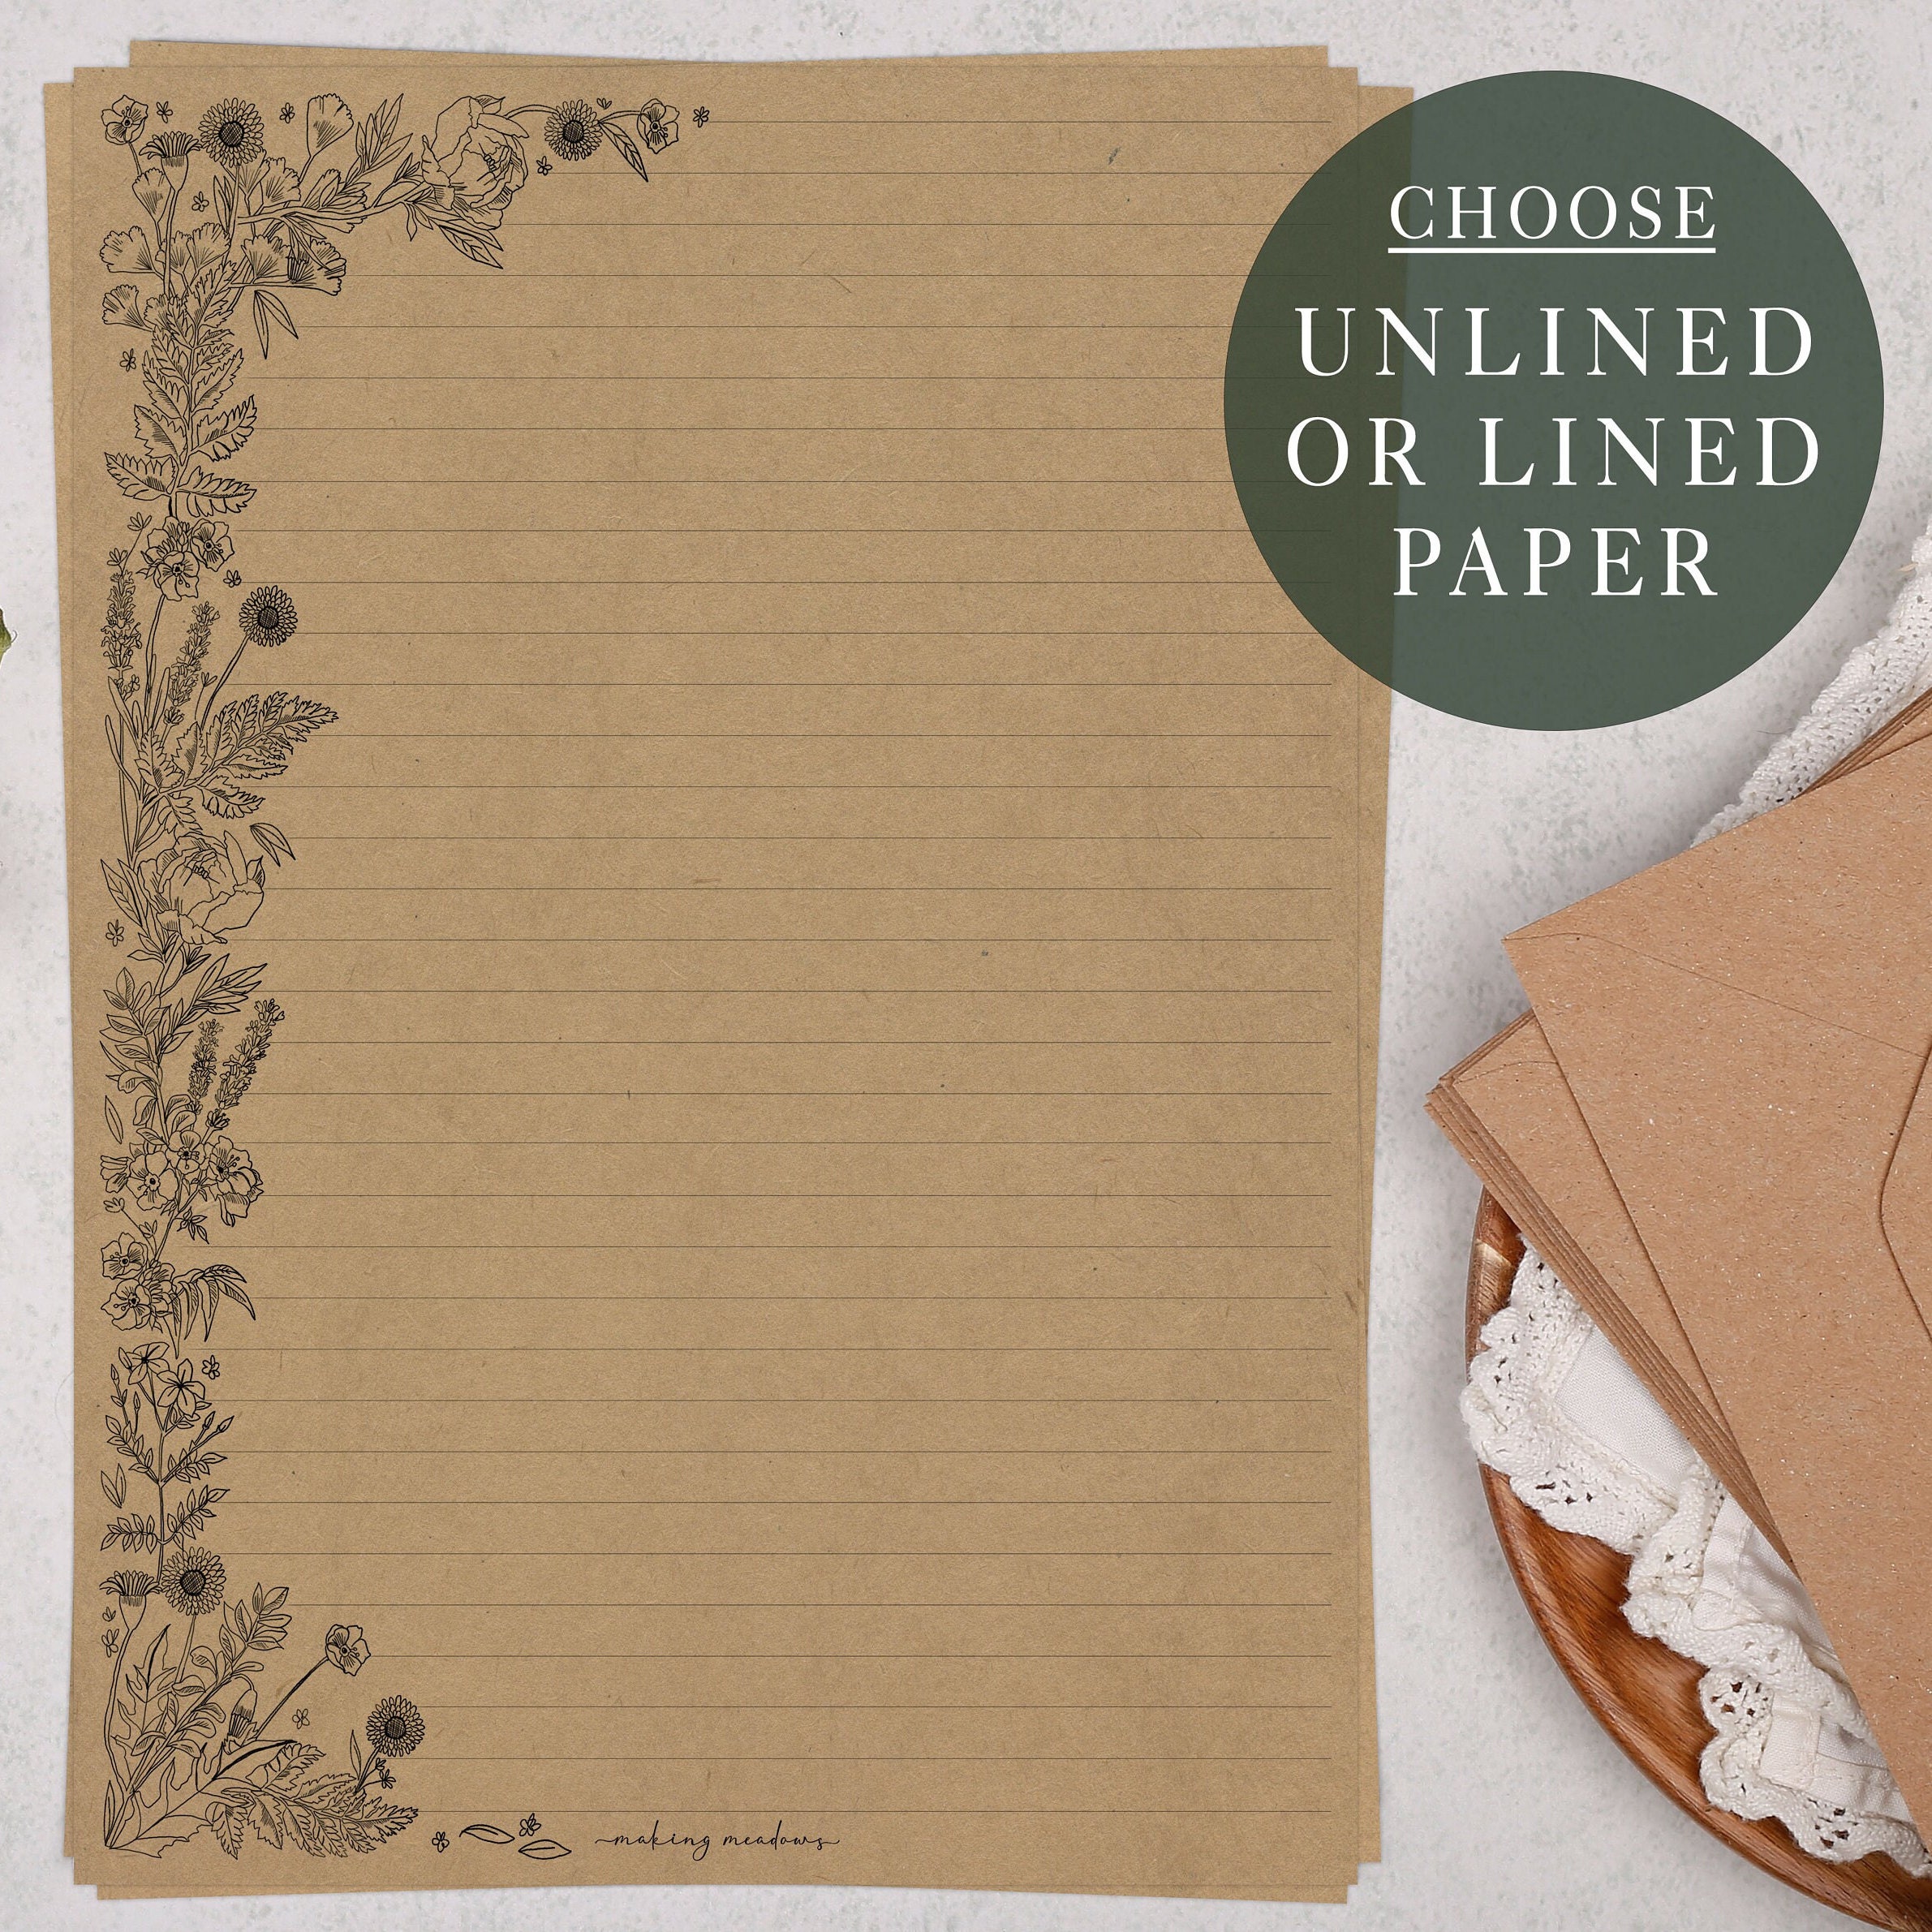 20 sheets of kraft paper DIN A4 white 180g